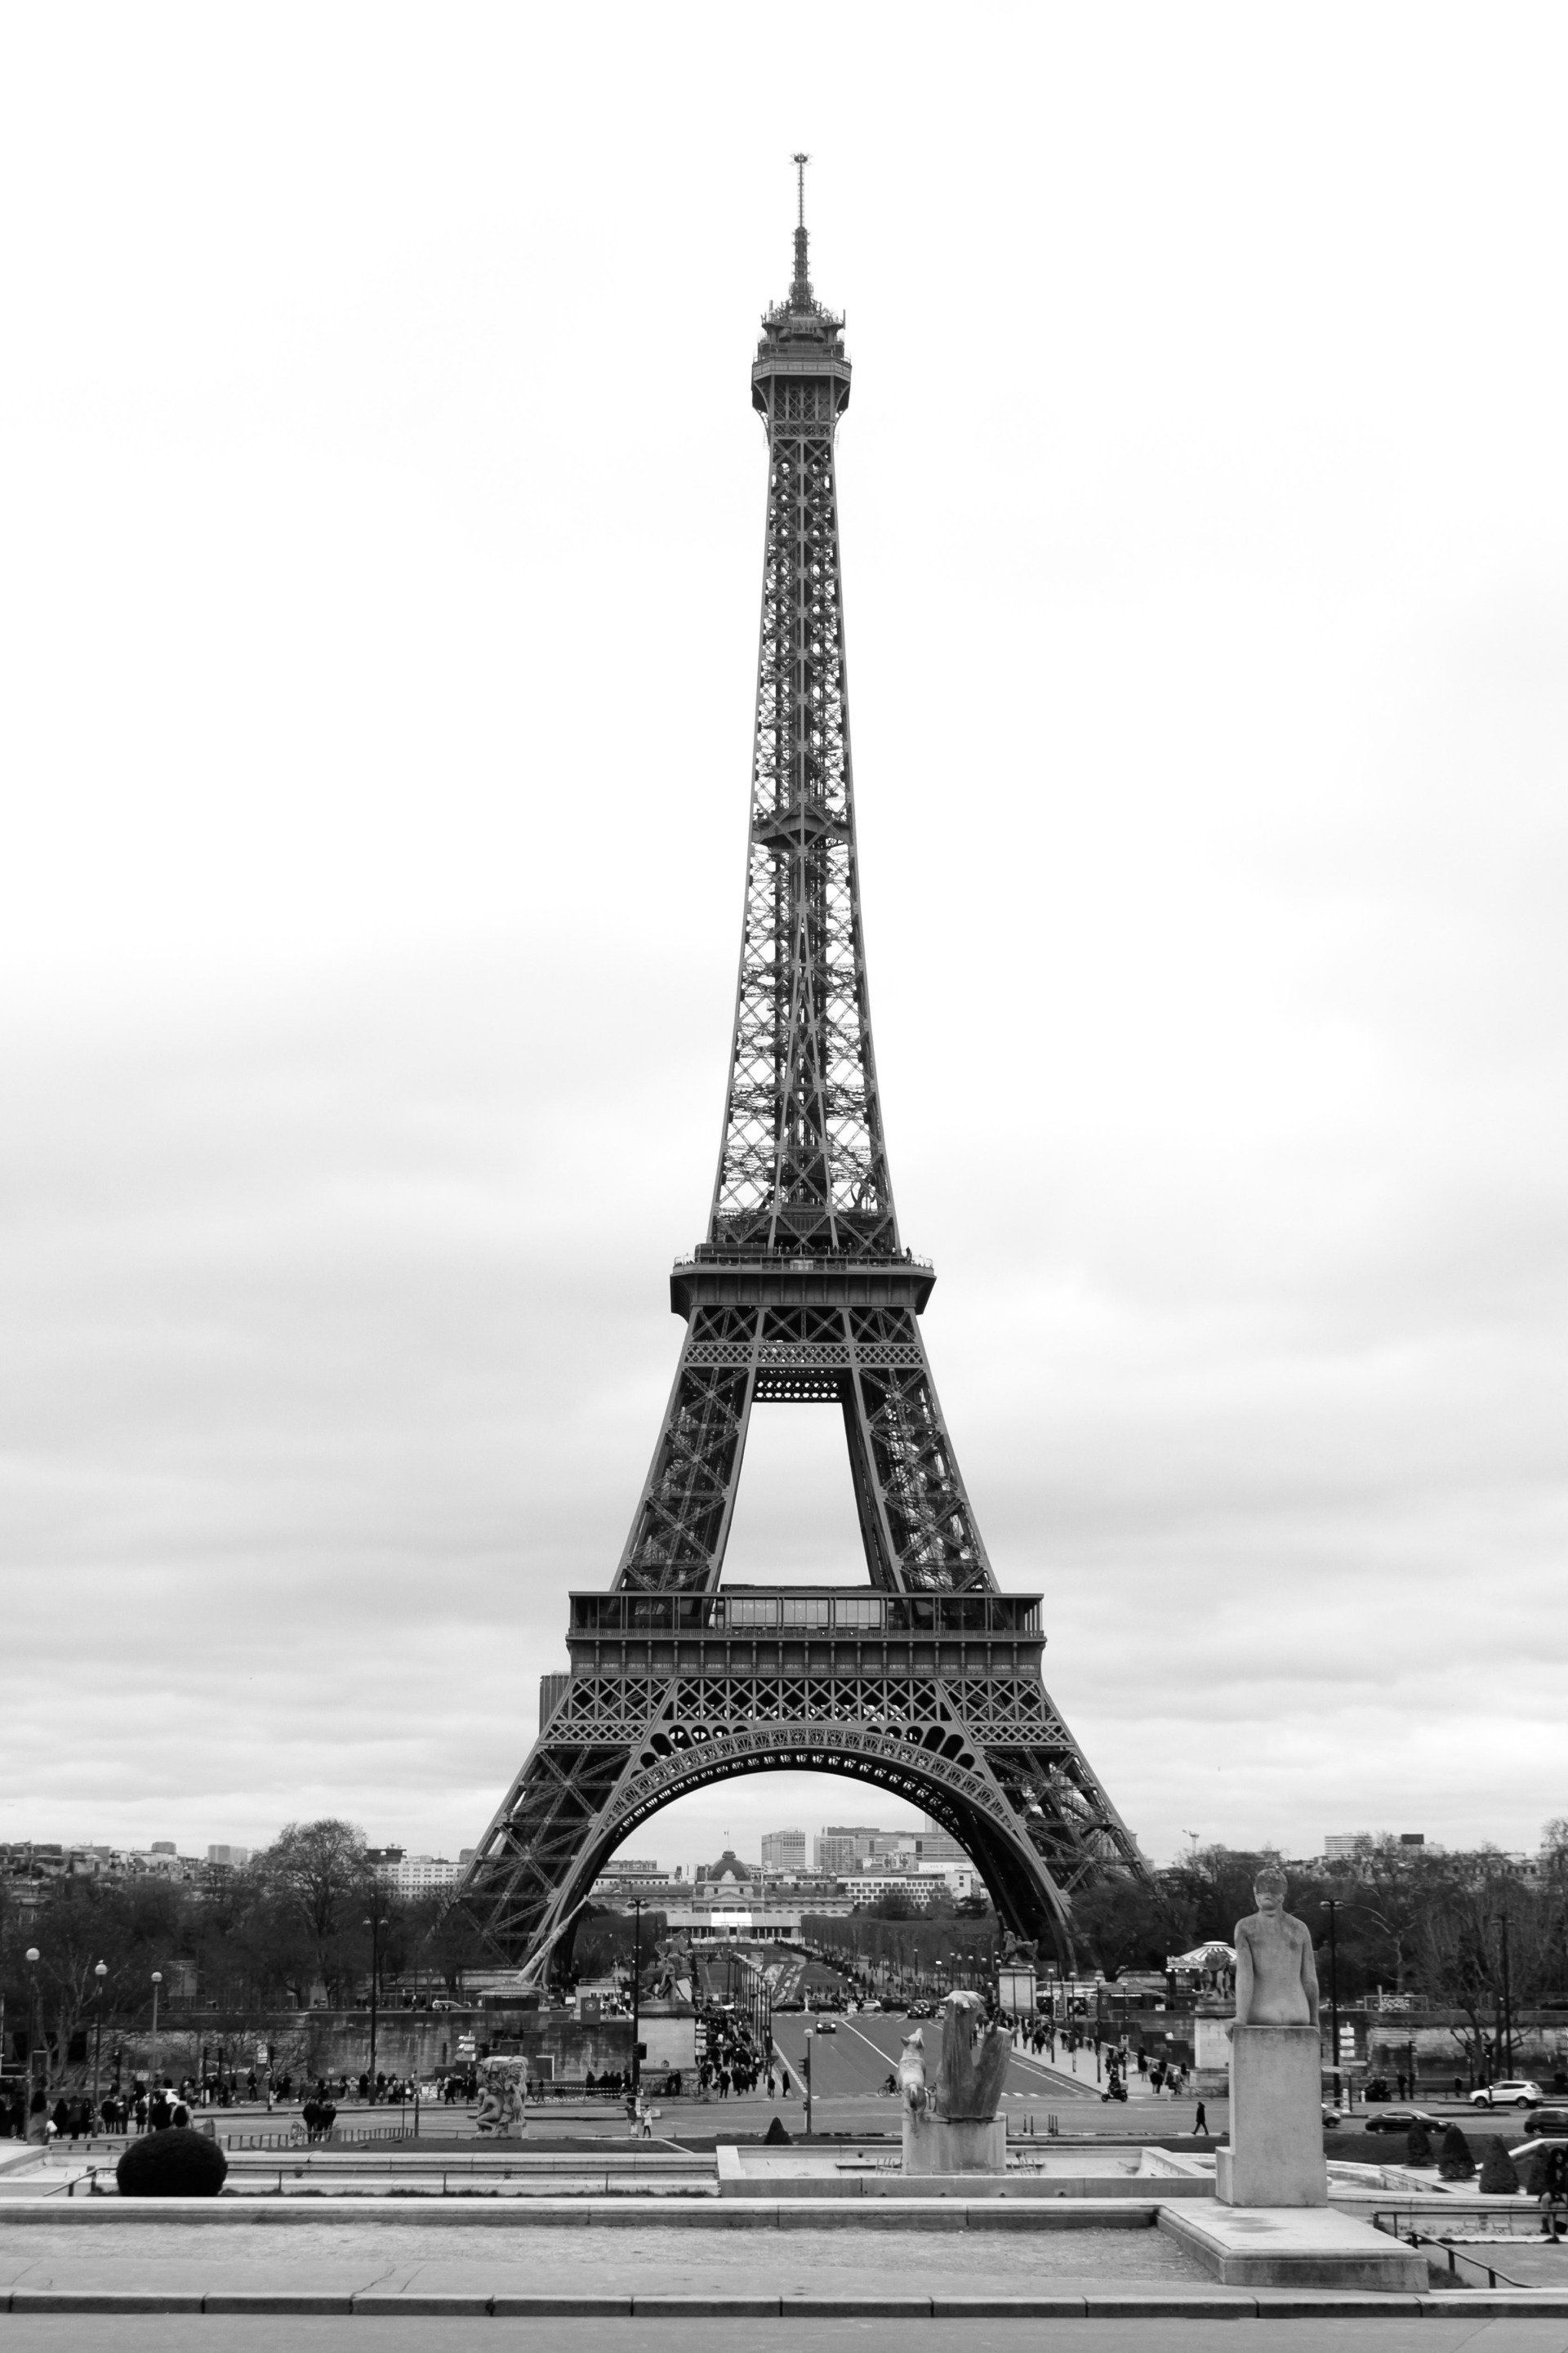 A black and white photo of the eiffel tower in paris.